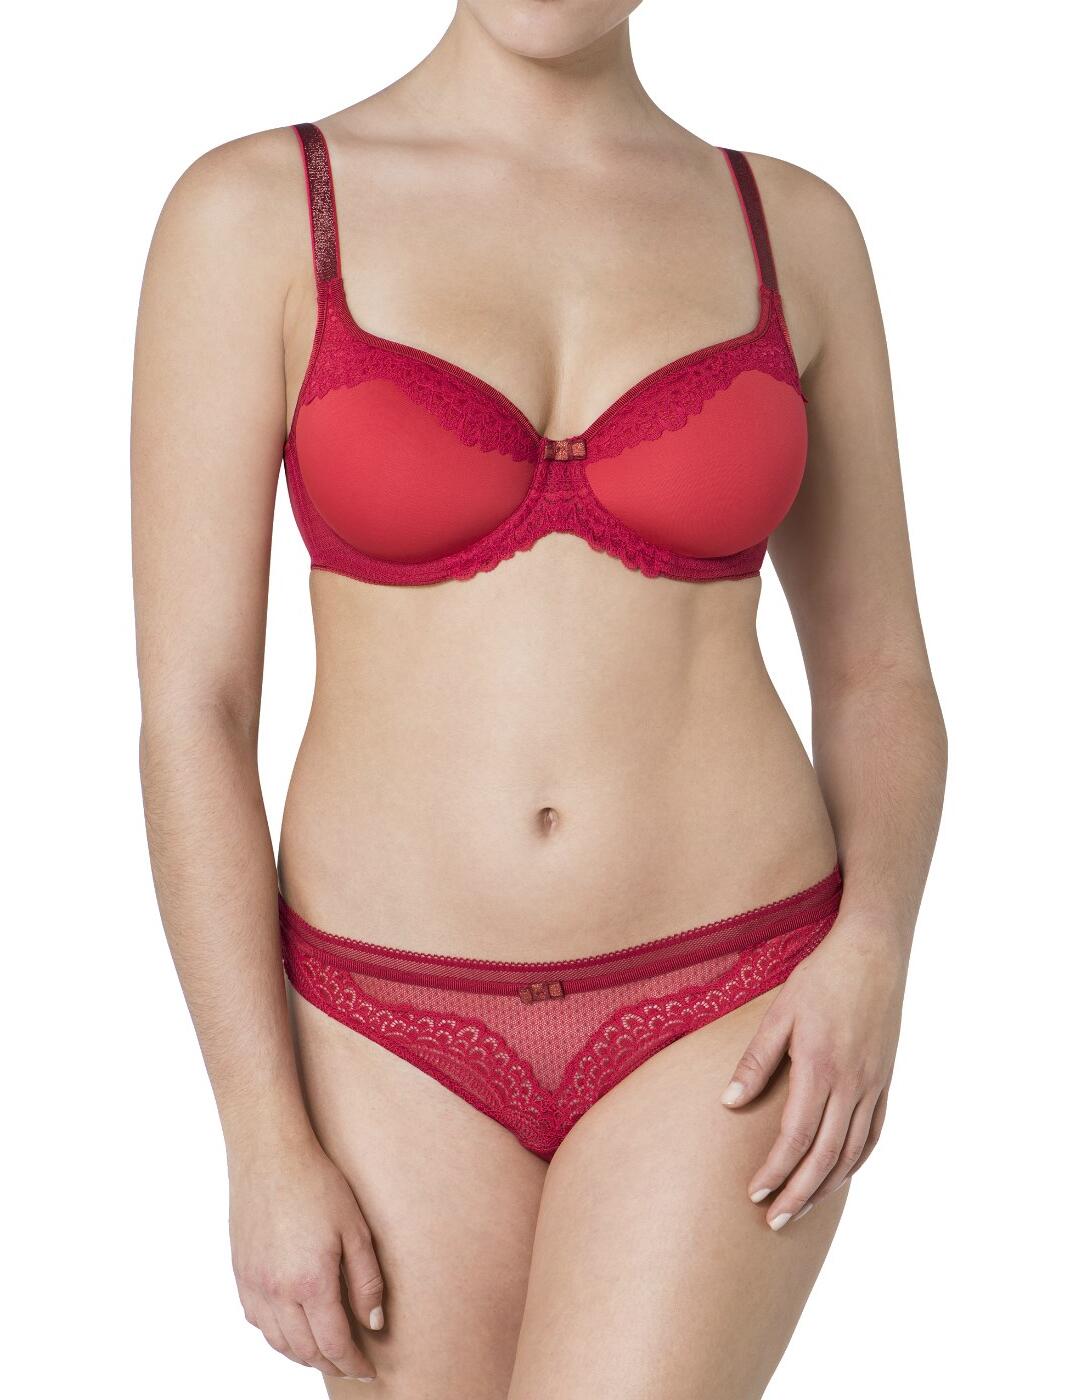 Triumph Beauty-Full Darling Bra 10157742 WHP Underwired Padded TShirt Spacer Cup